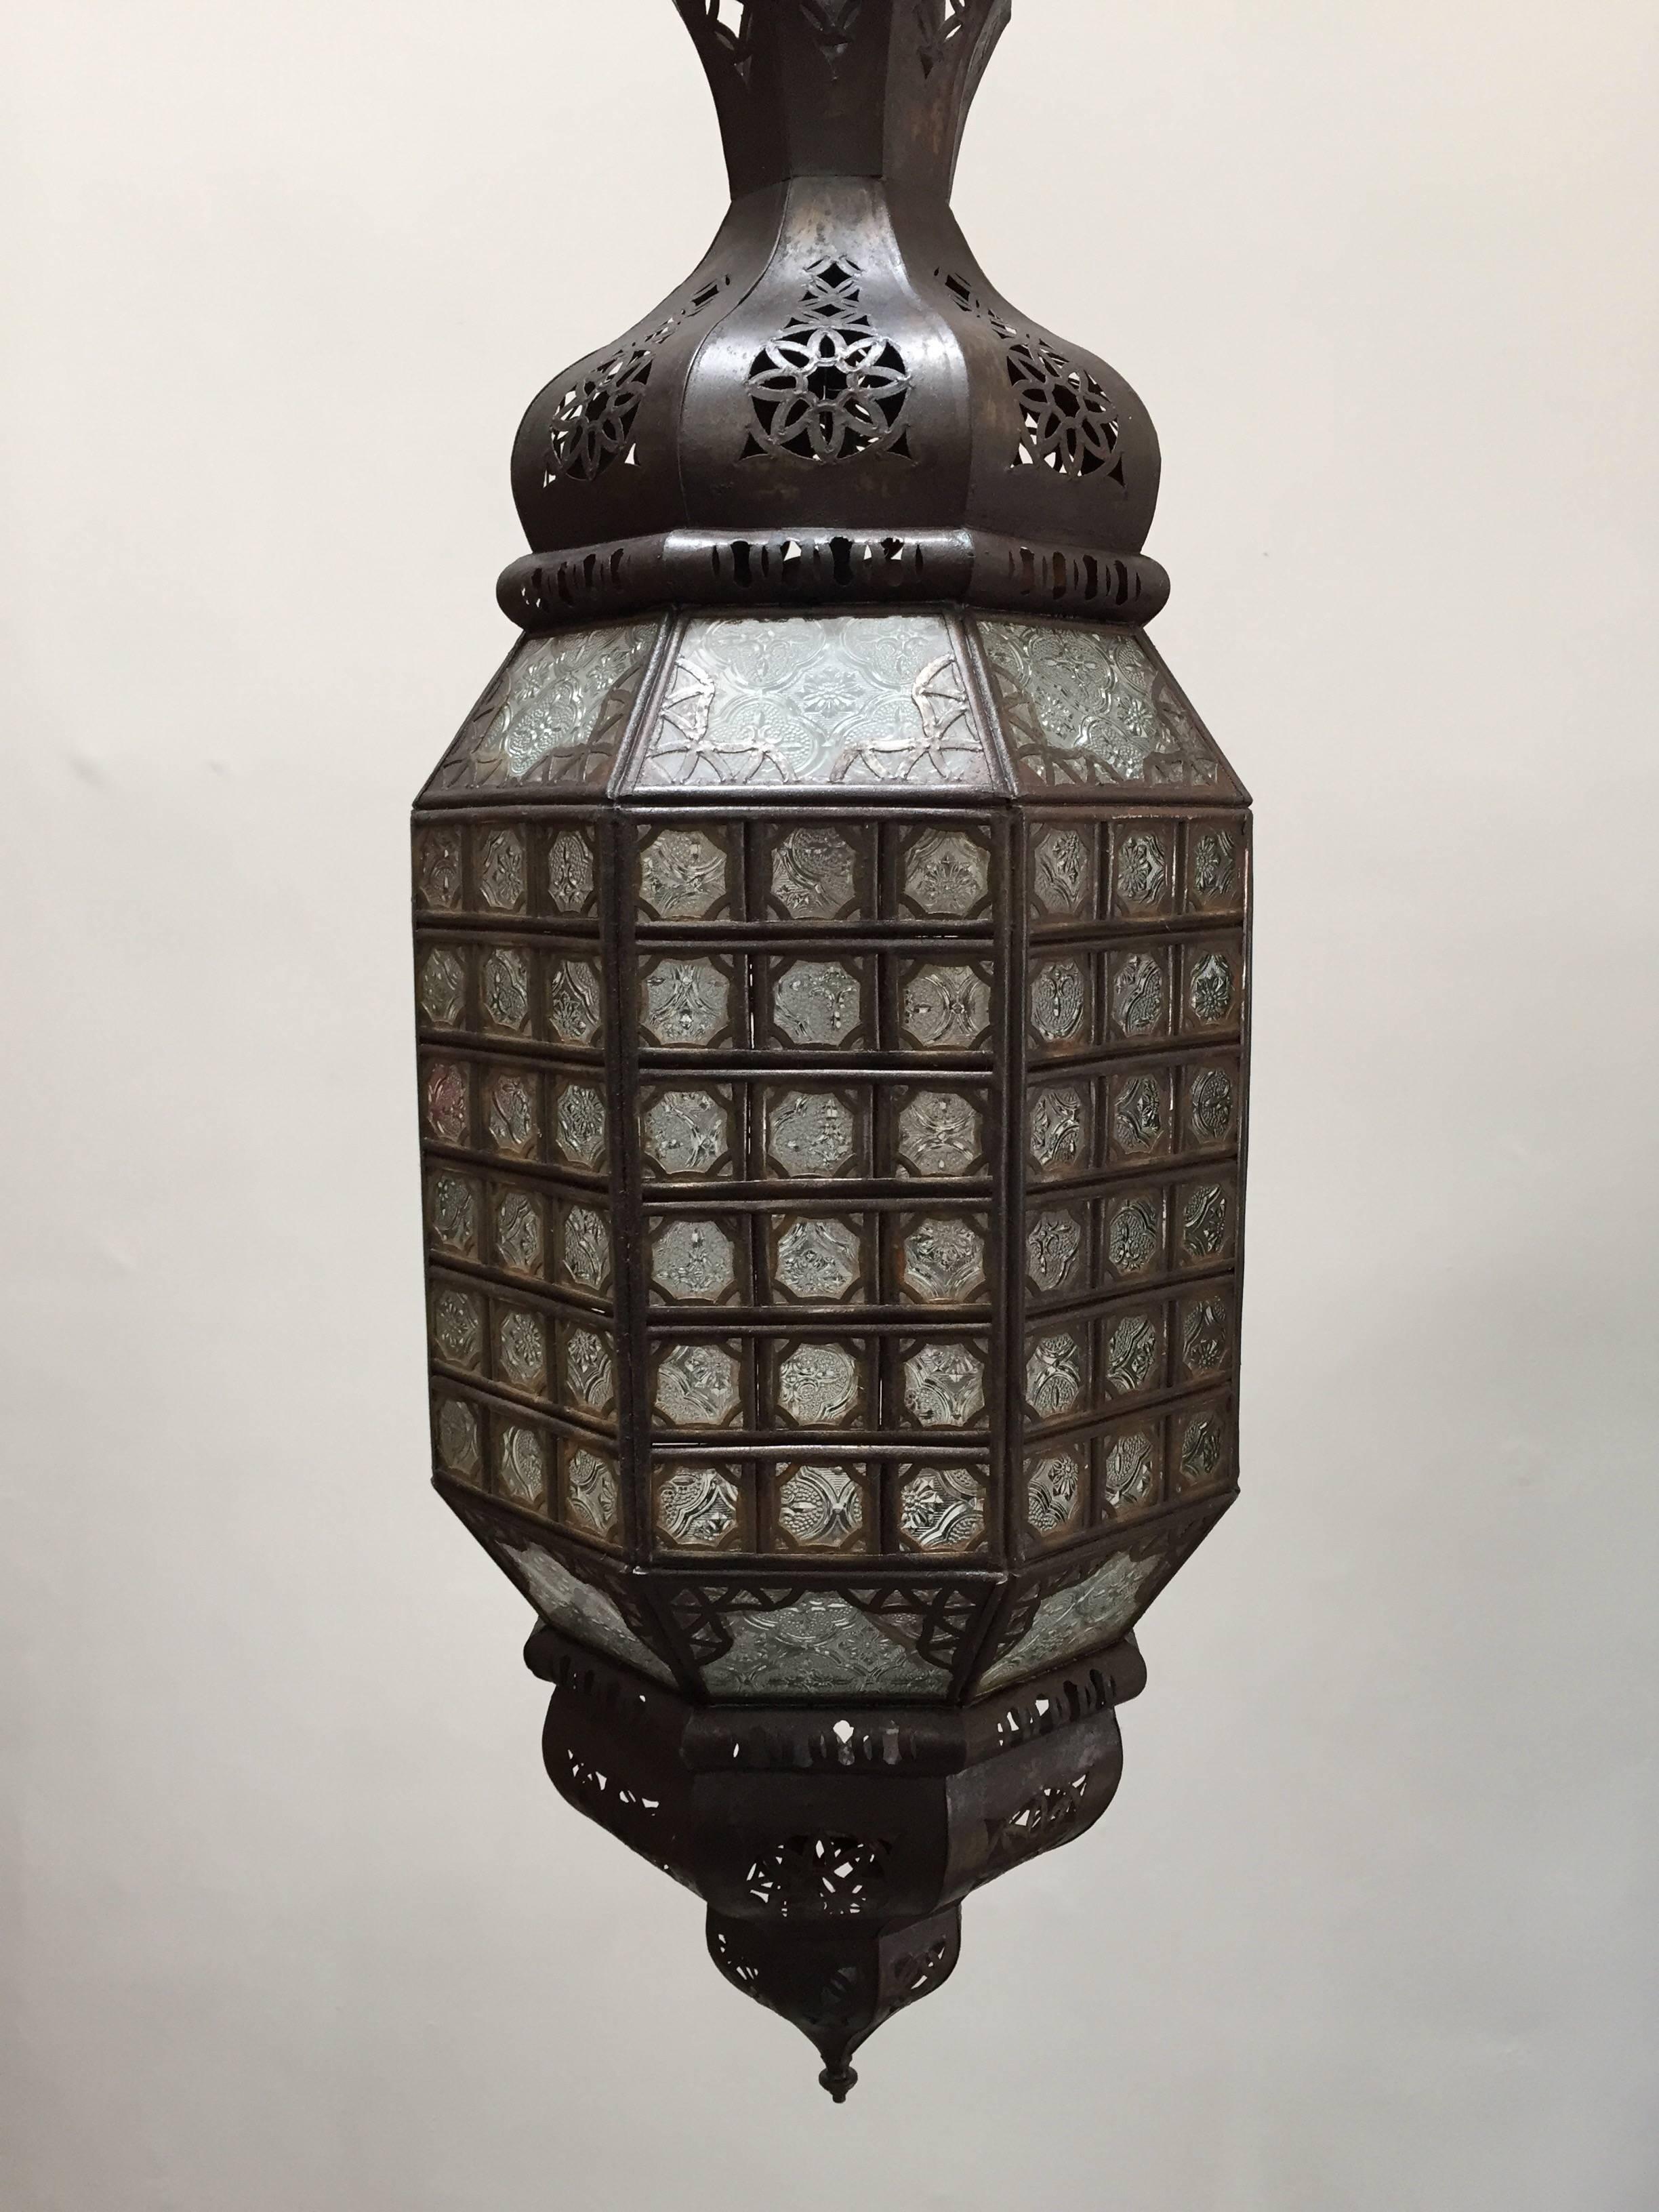 Stylish handcrafted Moroccan pendant lantern with clear molded glass and metal with an antique bronze finish.
Moorish style glass pendant with dozen of small cut-glass with filigree metal designs in diamond shape.
This Moroccan light fixture is